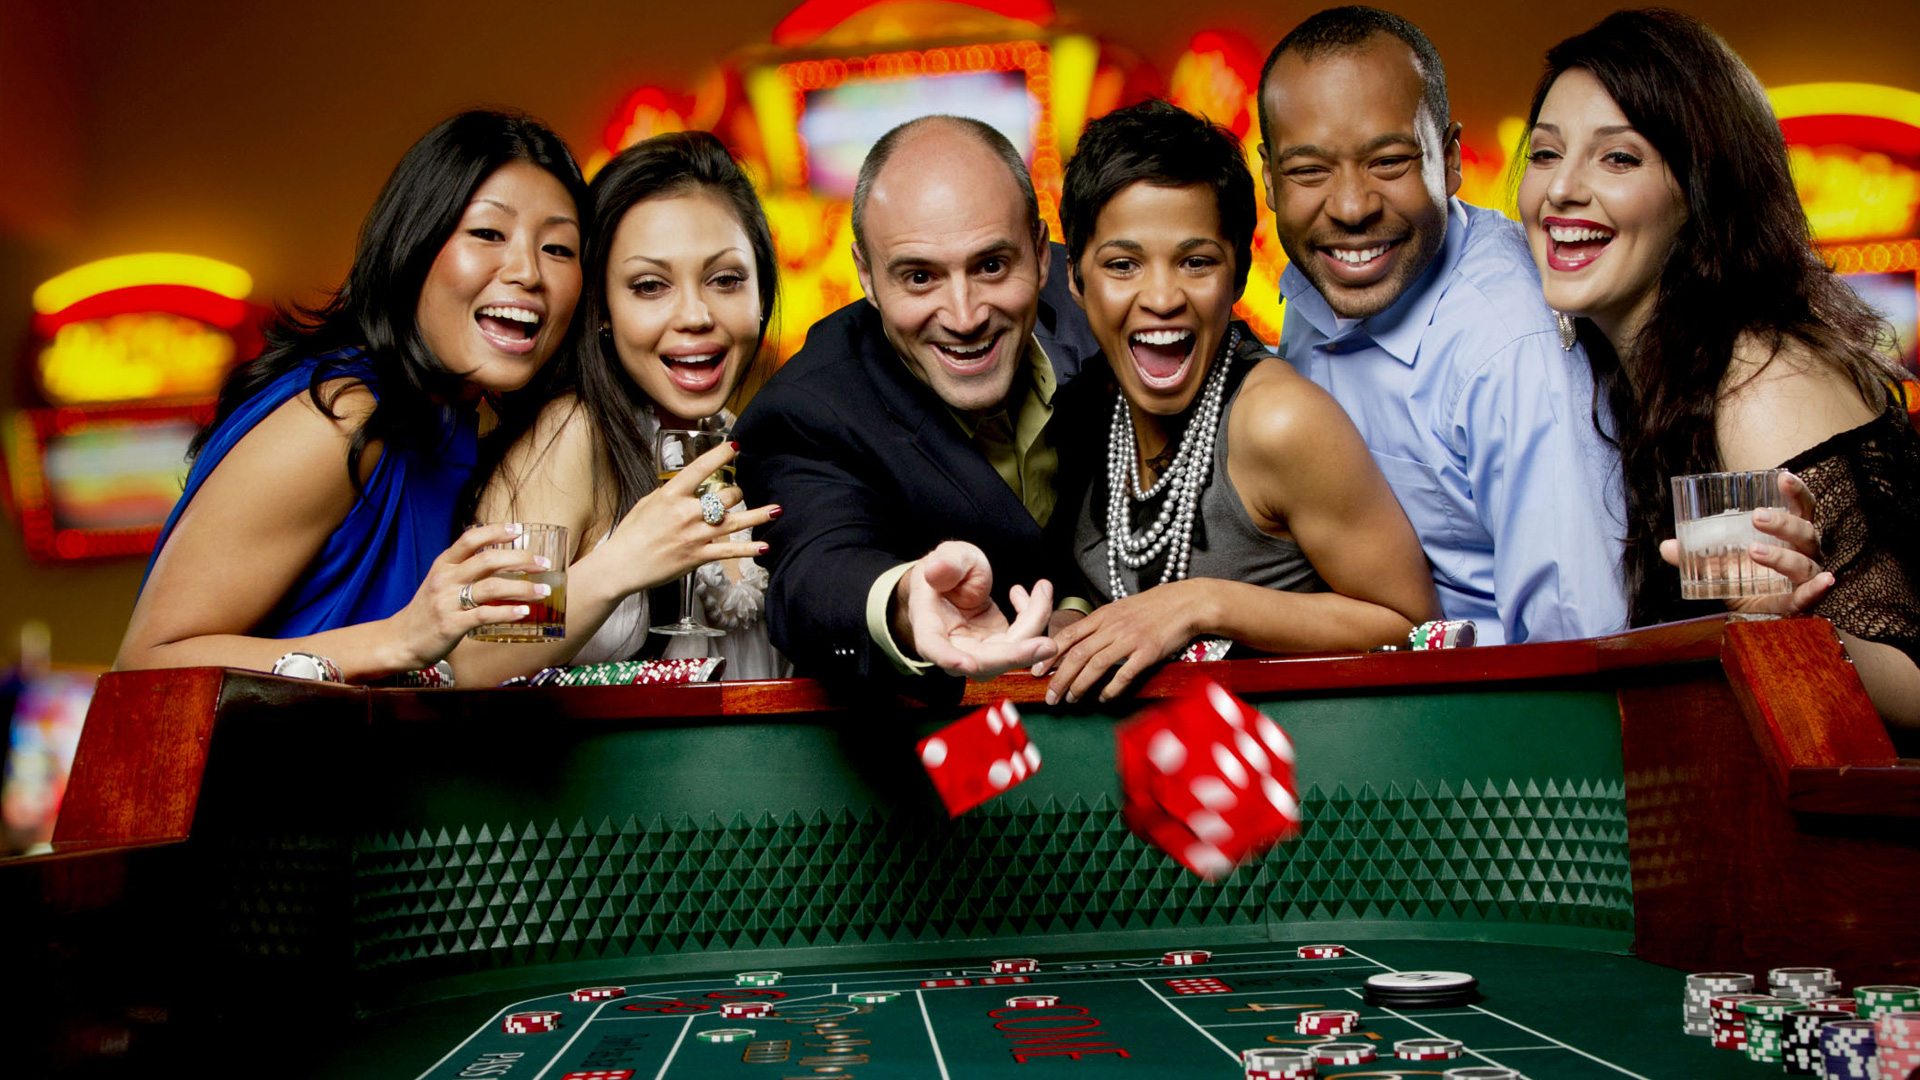 online casino or real, what to choose